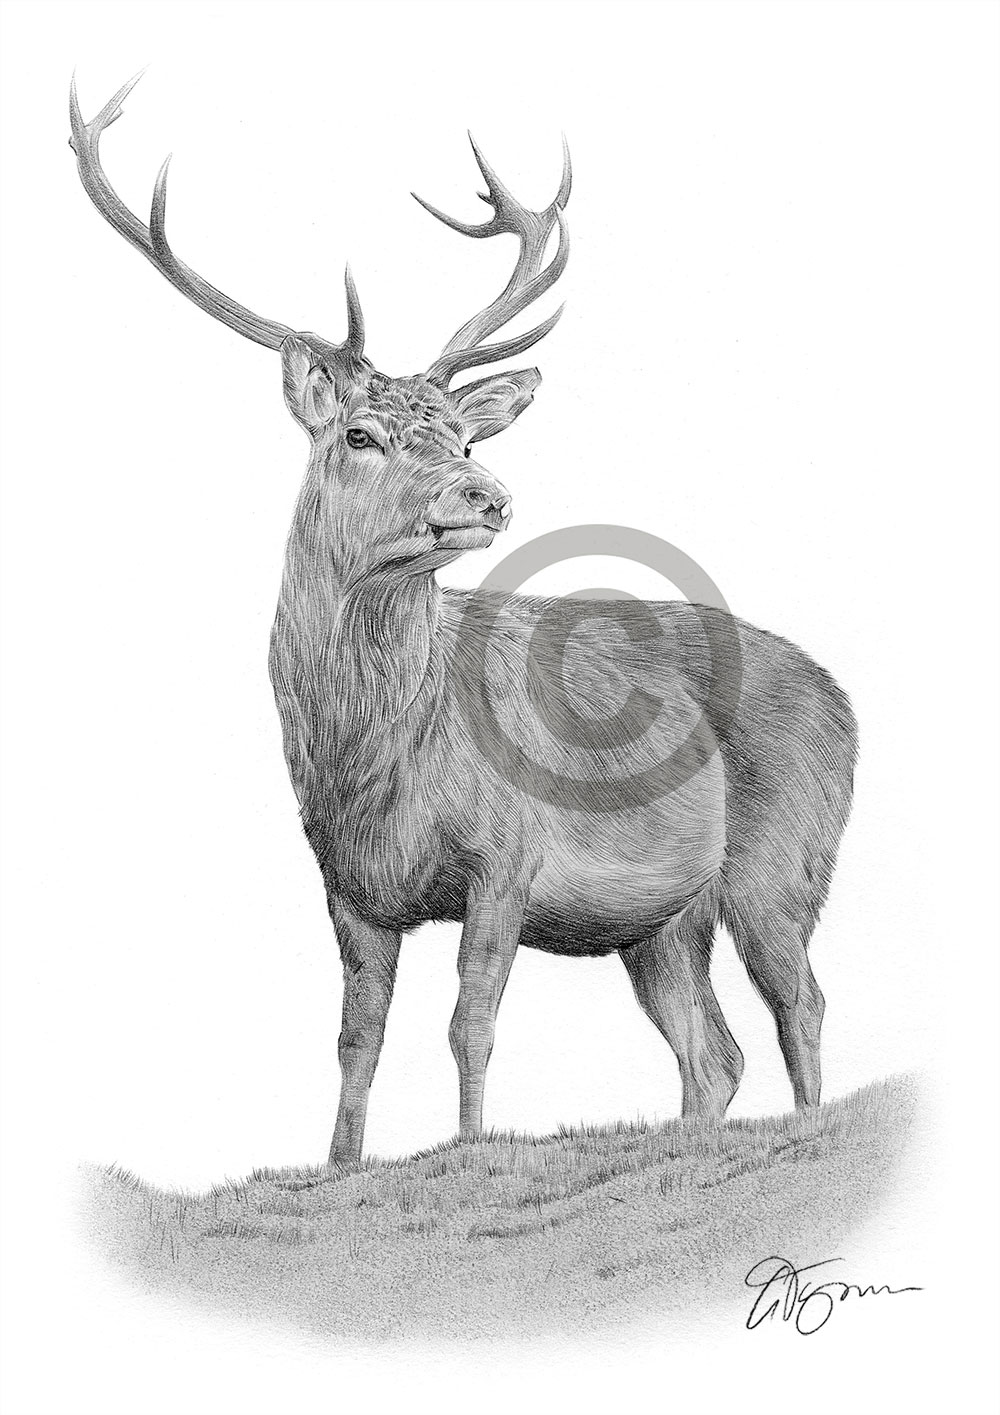 Pencil drawing of a red deer by UK artist Gary Tymon